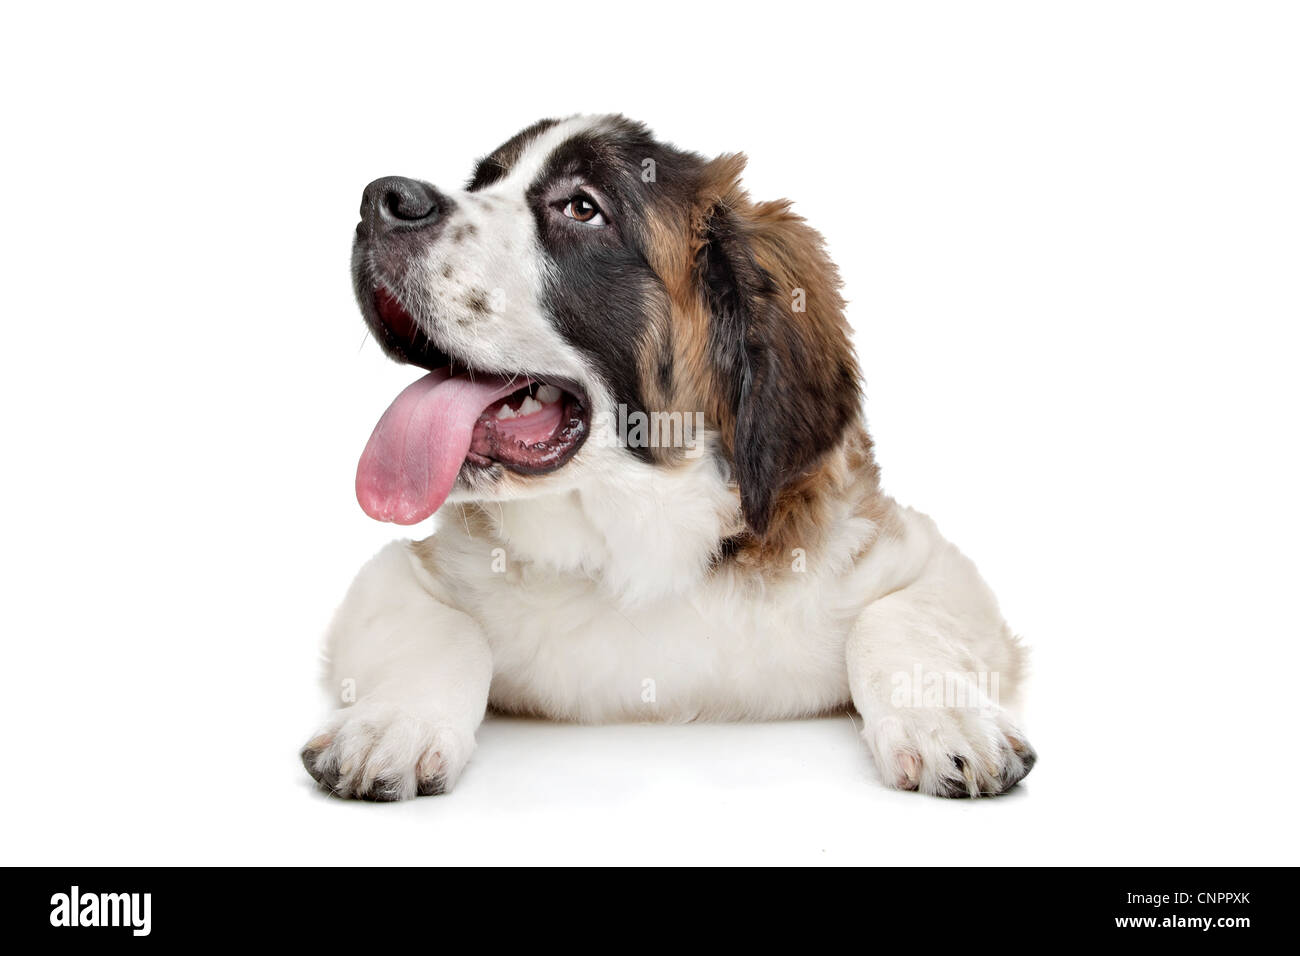 St Bernard Dog Cut Out Stock Images & Pictures - Alamy